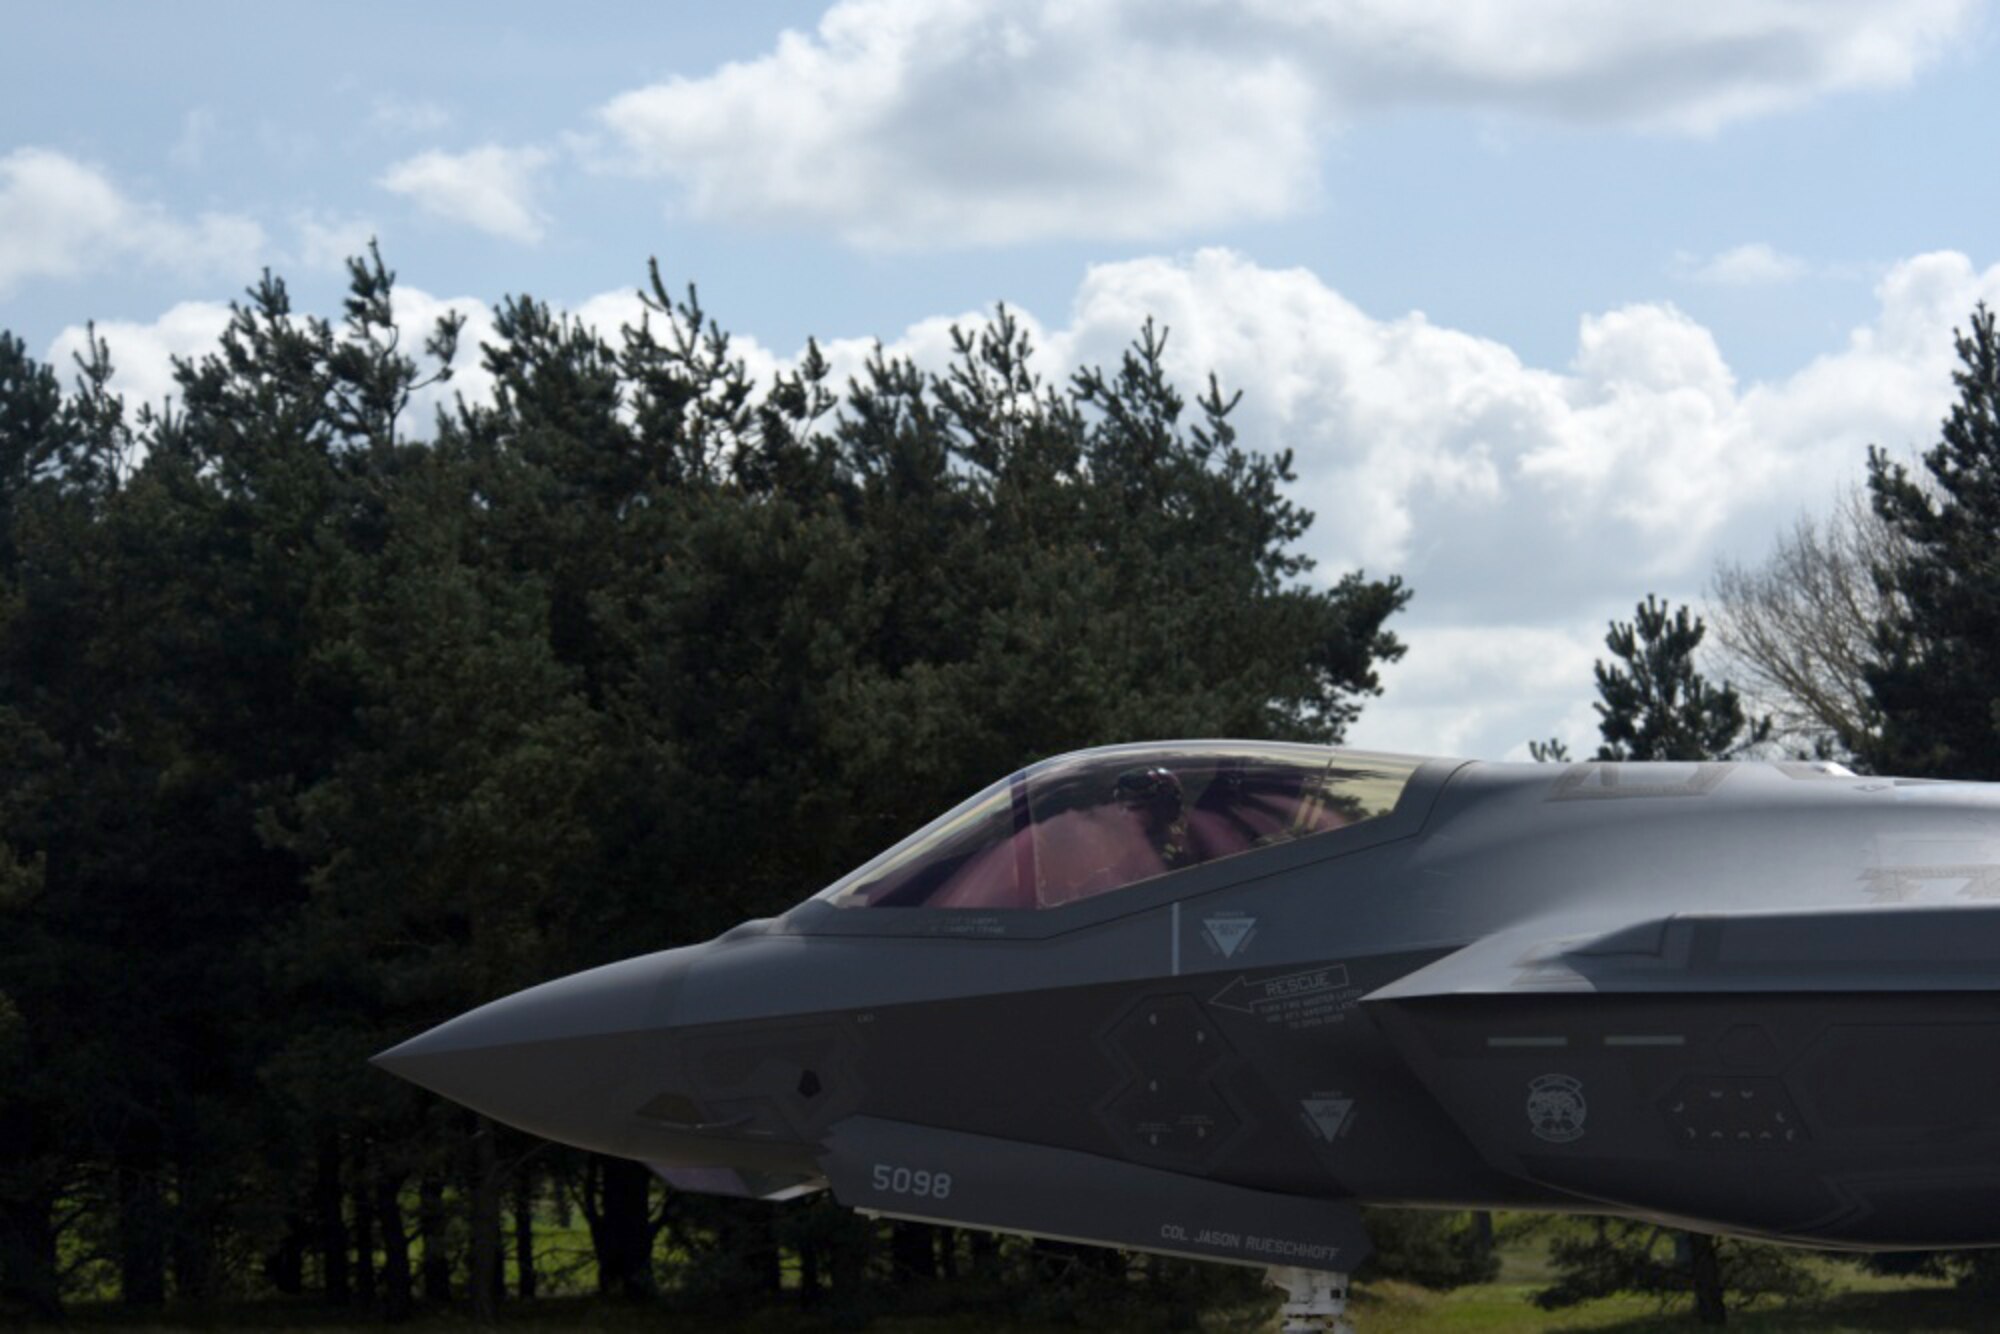 An F-35 Lightning II from the 34th Fighter Squadron at Hill Air Force Base, Utah, taxis after landing at Royal Air Force Lakenheath, England, April 15, 2017. The fifth generation, multi-role fighter aircraft is deployed here to maximize training opportunities, affirm enduring commitments to NATO allies, and deter any actions that destabilize regional security. (U.S. Air Force photo/Airman 1st Class Eli Chevalier)